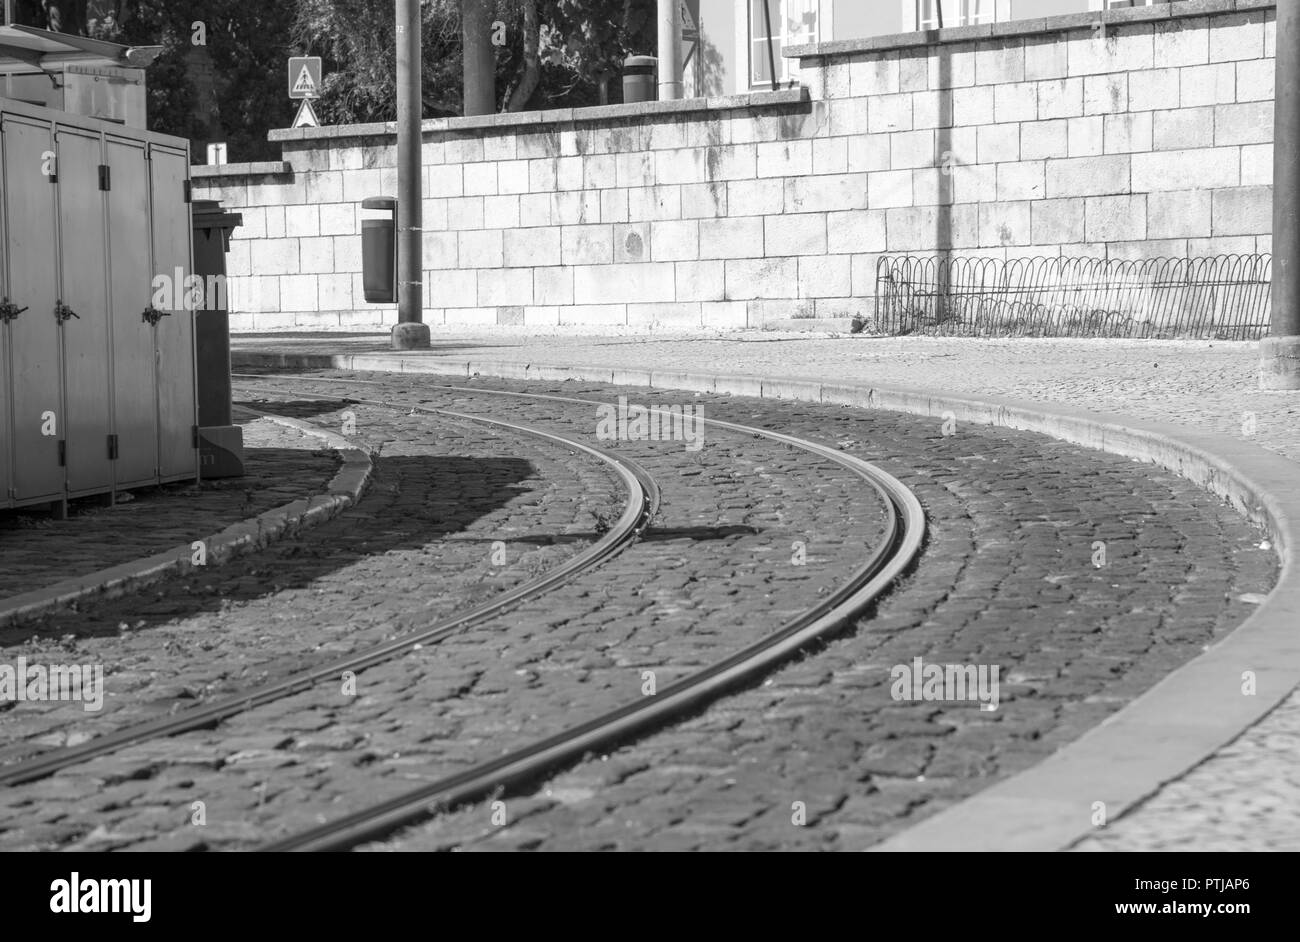 Tram tracks used by trams in Lisbon Portugal Stock Photo